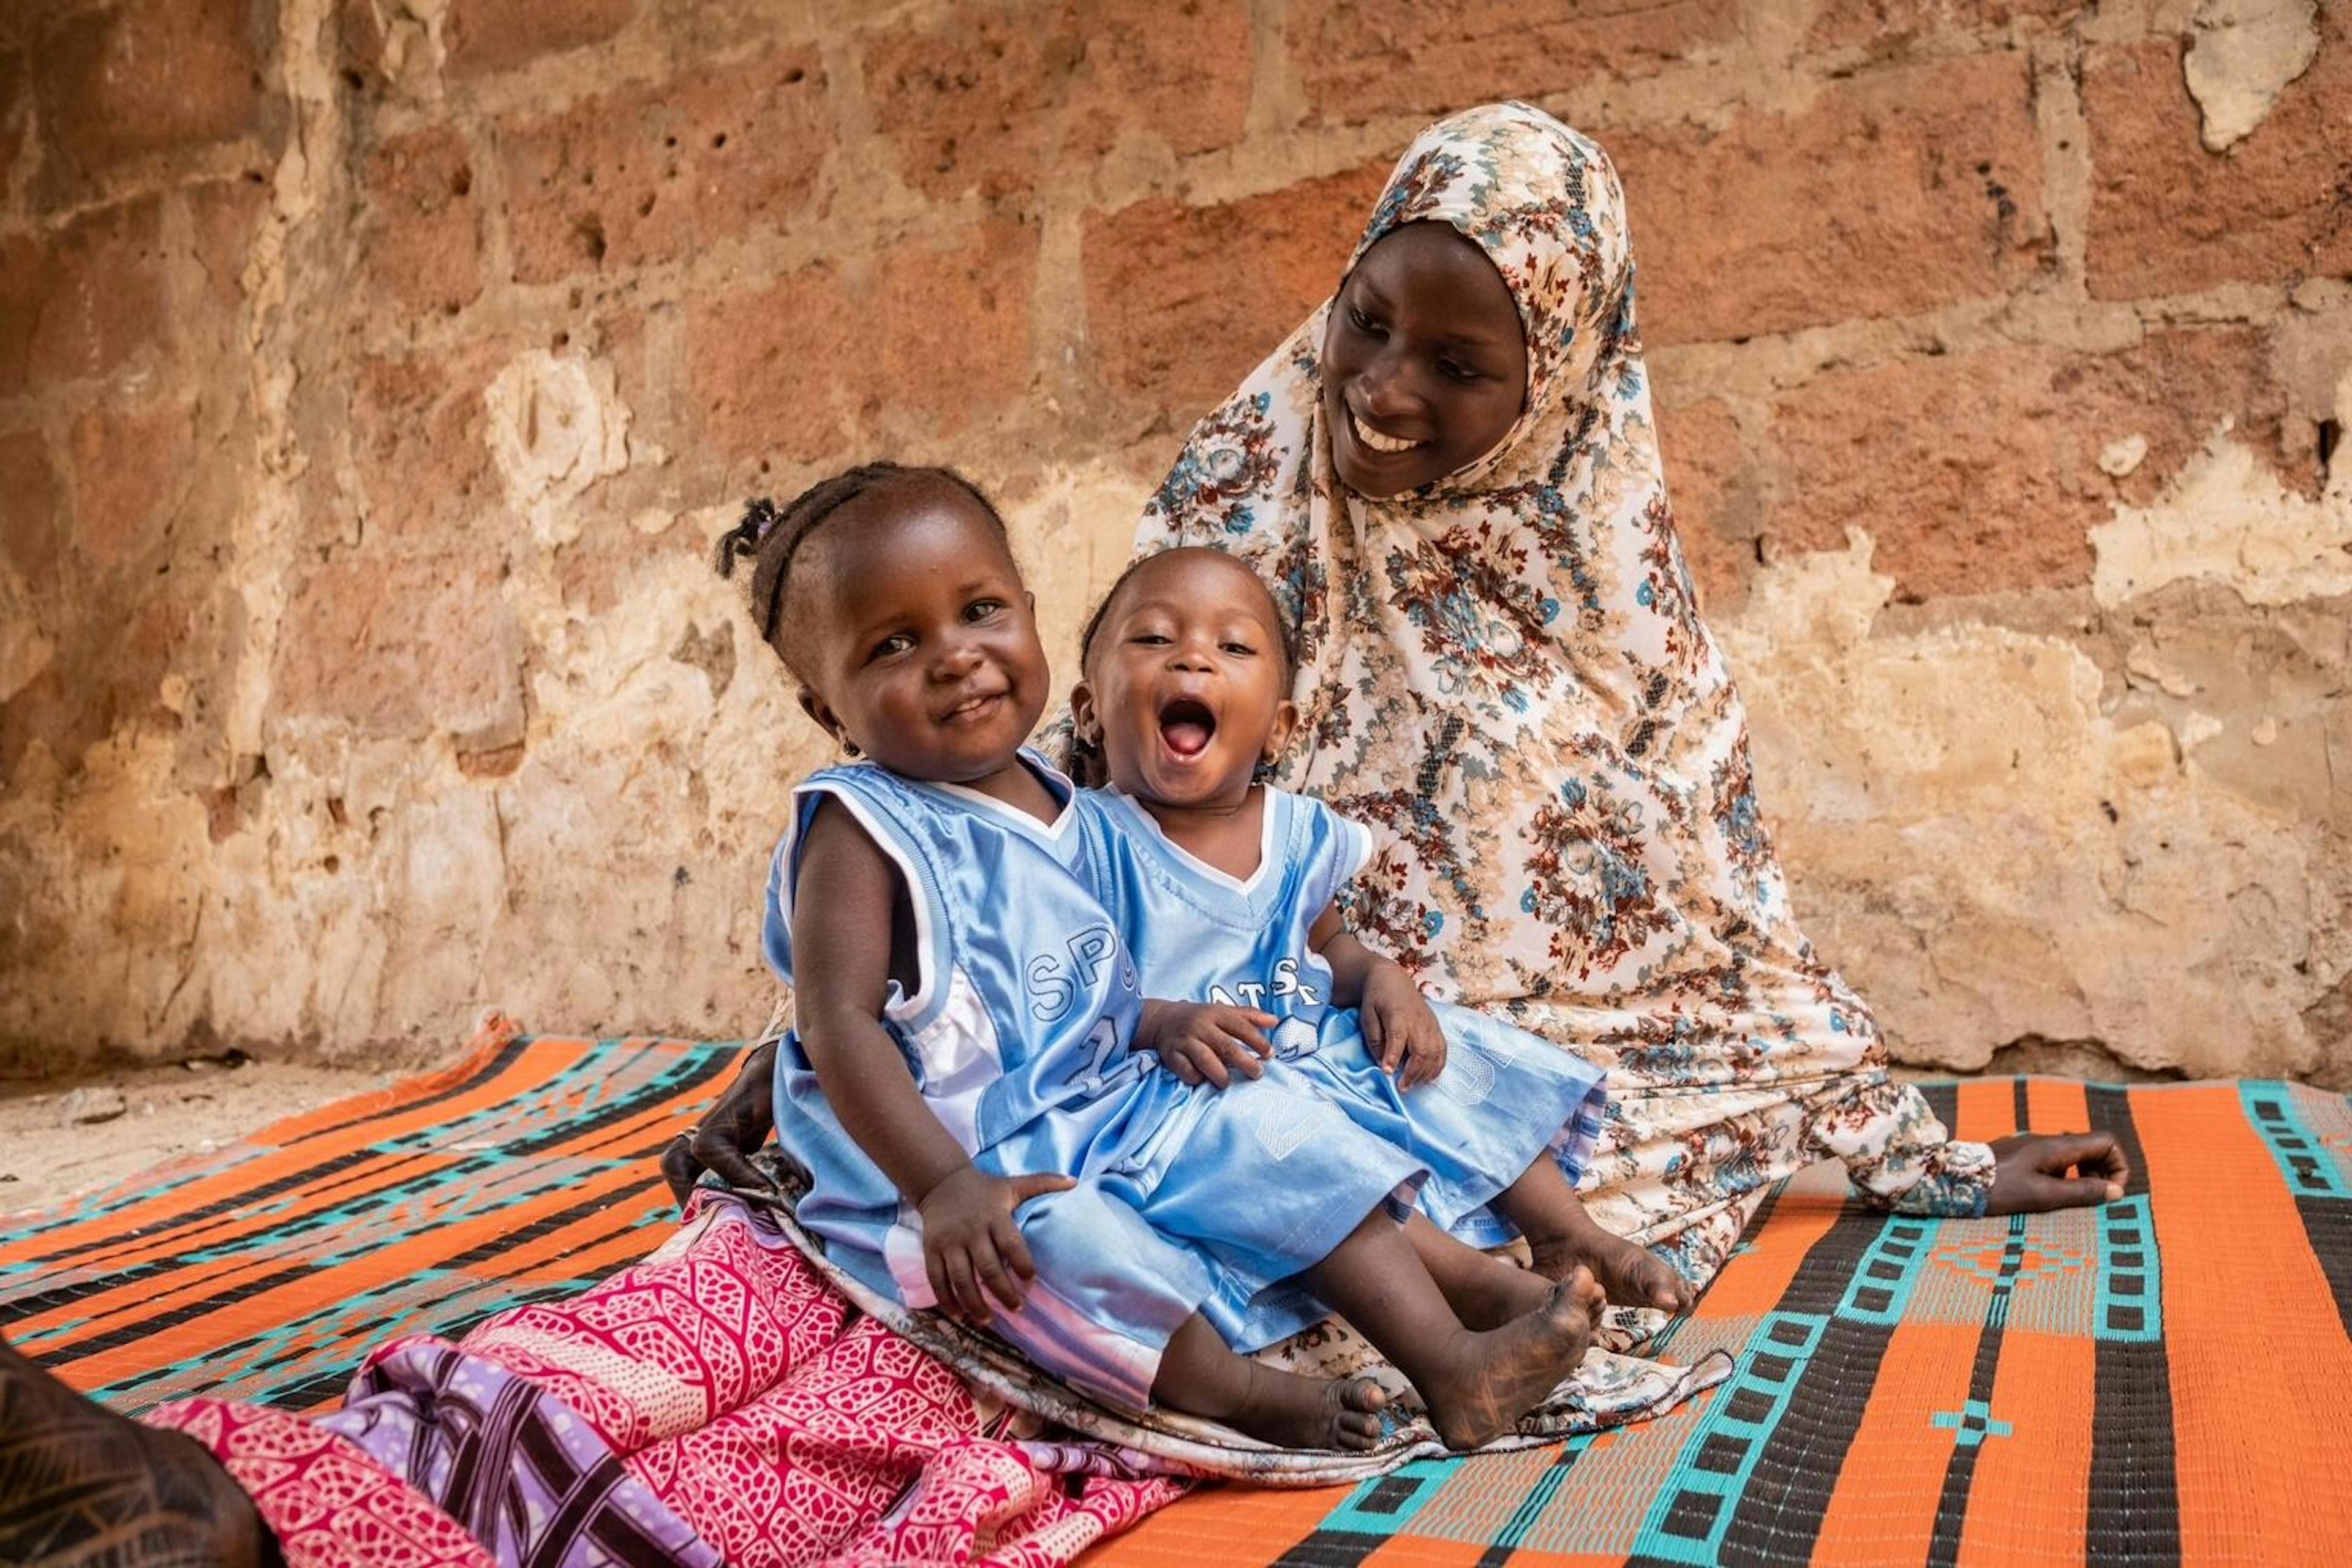 Catching signs of malnutrition early - twin girls sit with their mother after recovering from severe acute malnutrition.